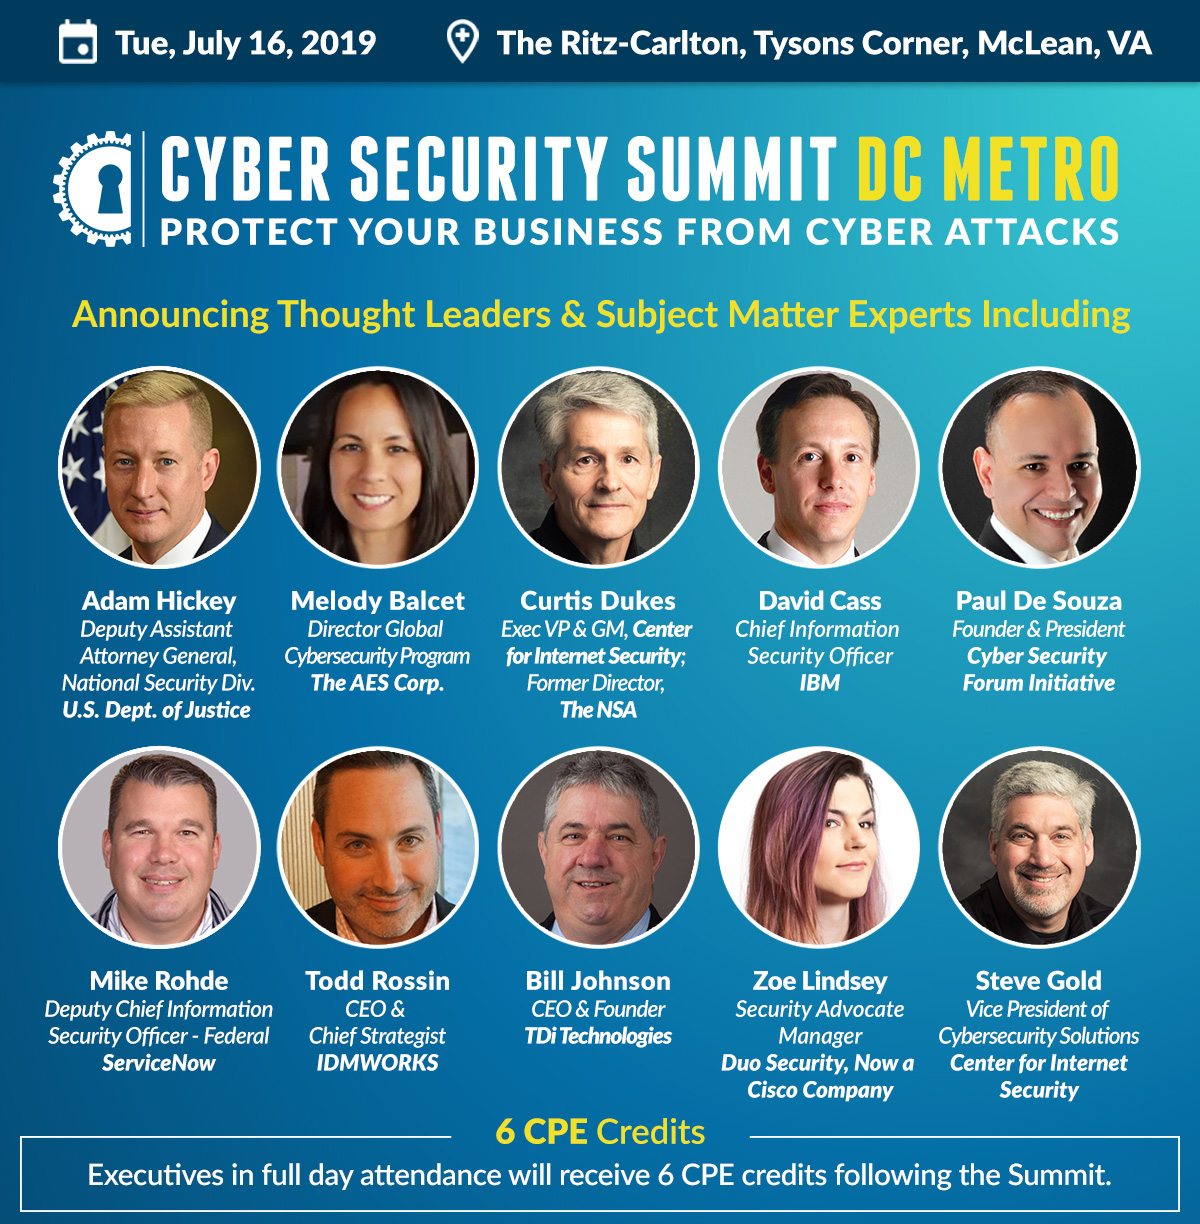 Complimentary Admission to the Cyber Security Summit